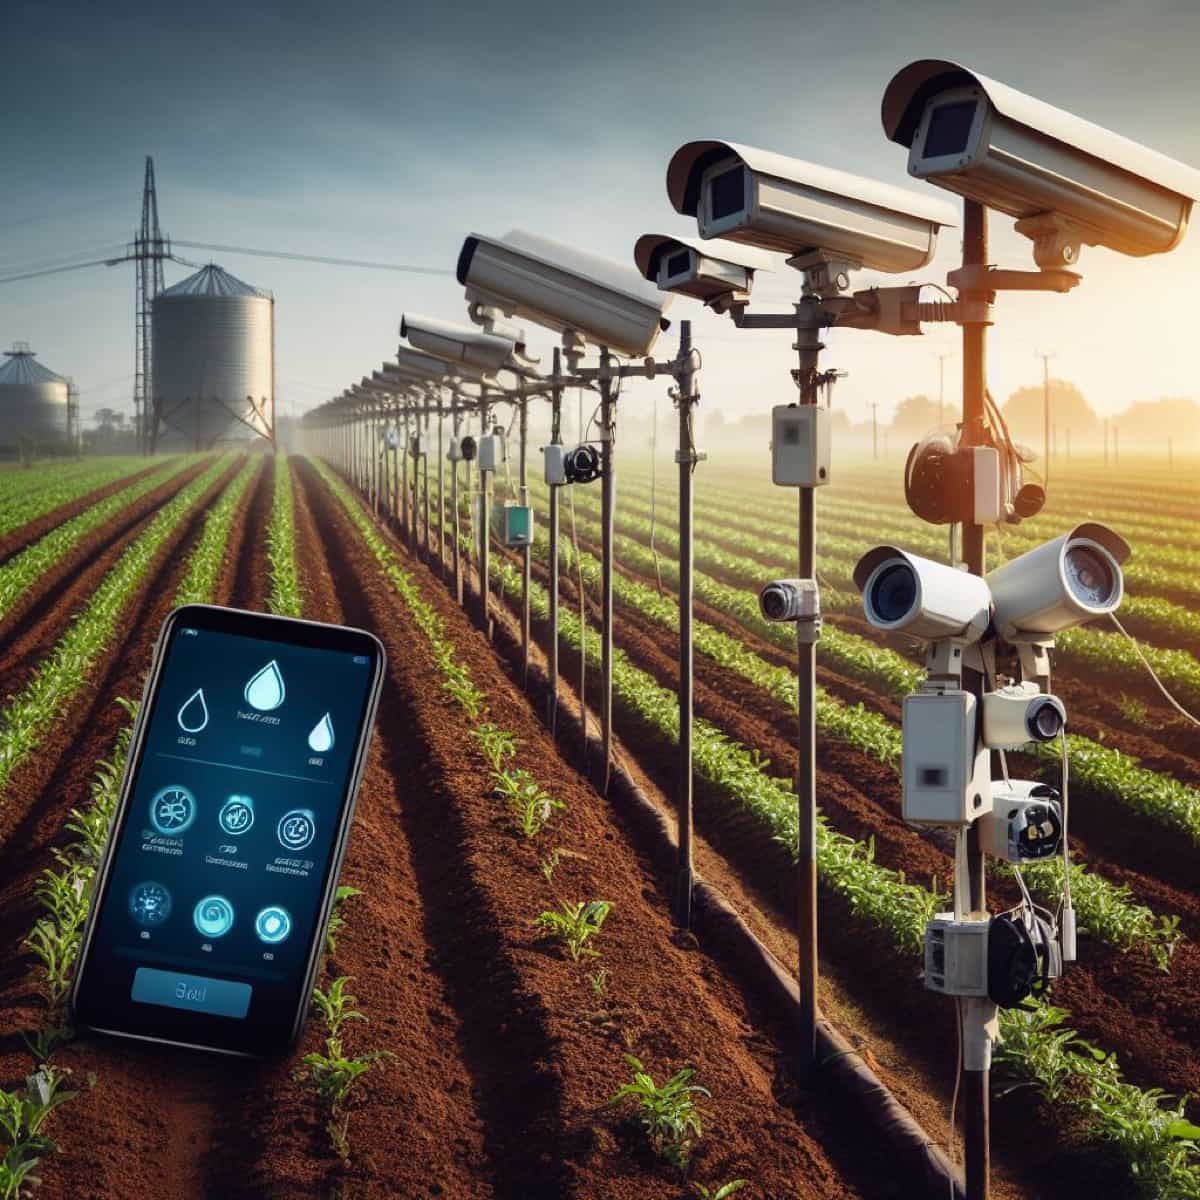 High Security Cameras in the Farm